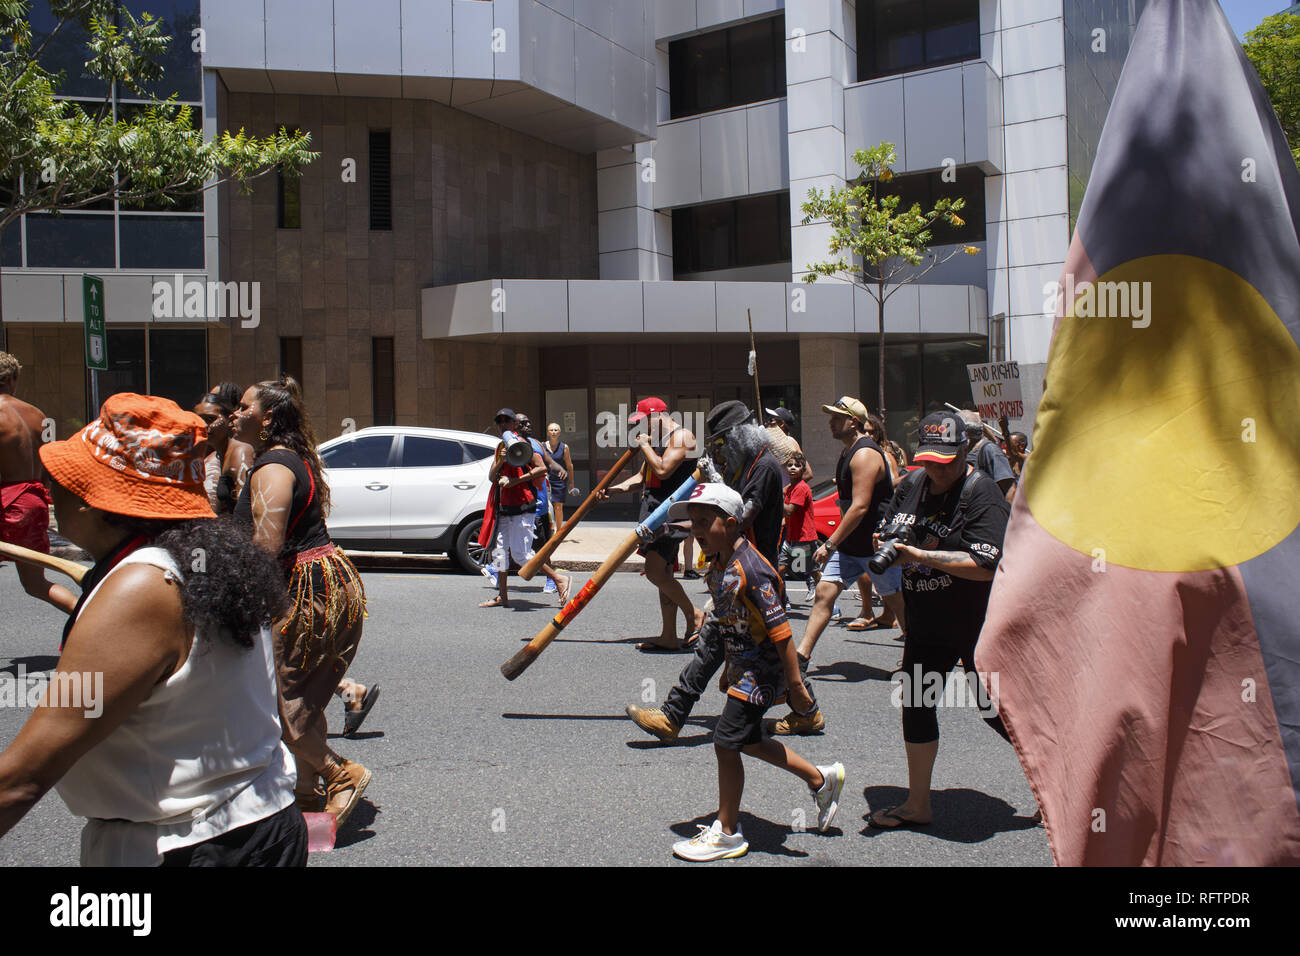 Brisbane, Queensland, Australia. 26th Jan, 2019. Protesters continue to chant at the 26th January 2019 Meanjin (Brisbane) Invasion Day protest. On the 26th of January, many Australians celebrate Australia day, but to many indigenous Australian people, it is a day synonymous with decades of systematic abuse and genocide. Several thousand protesters took the streets in Brisbane (known as Meanjin by local indigenous people) to rally for sovereignty rights and date changes. Credit: Joshua Prieto/SOPA Images/ZUMA Wire/Alamy Live News Stock Photo